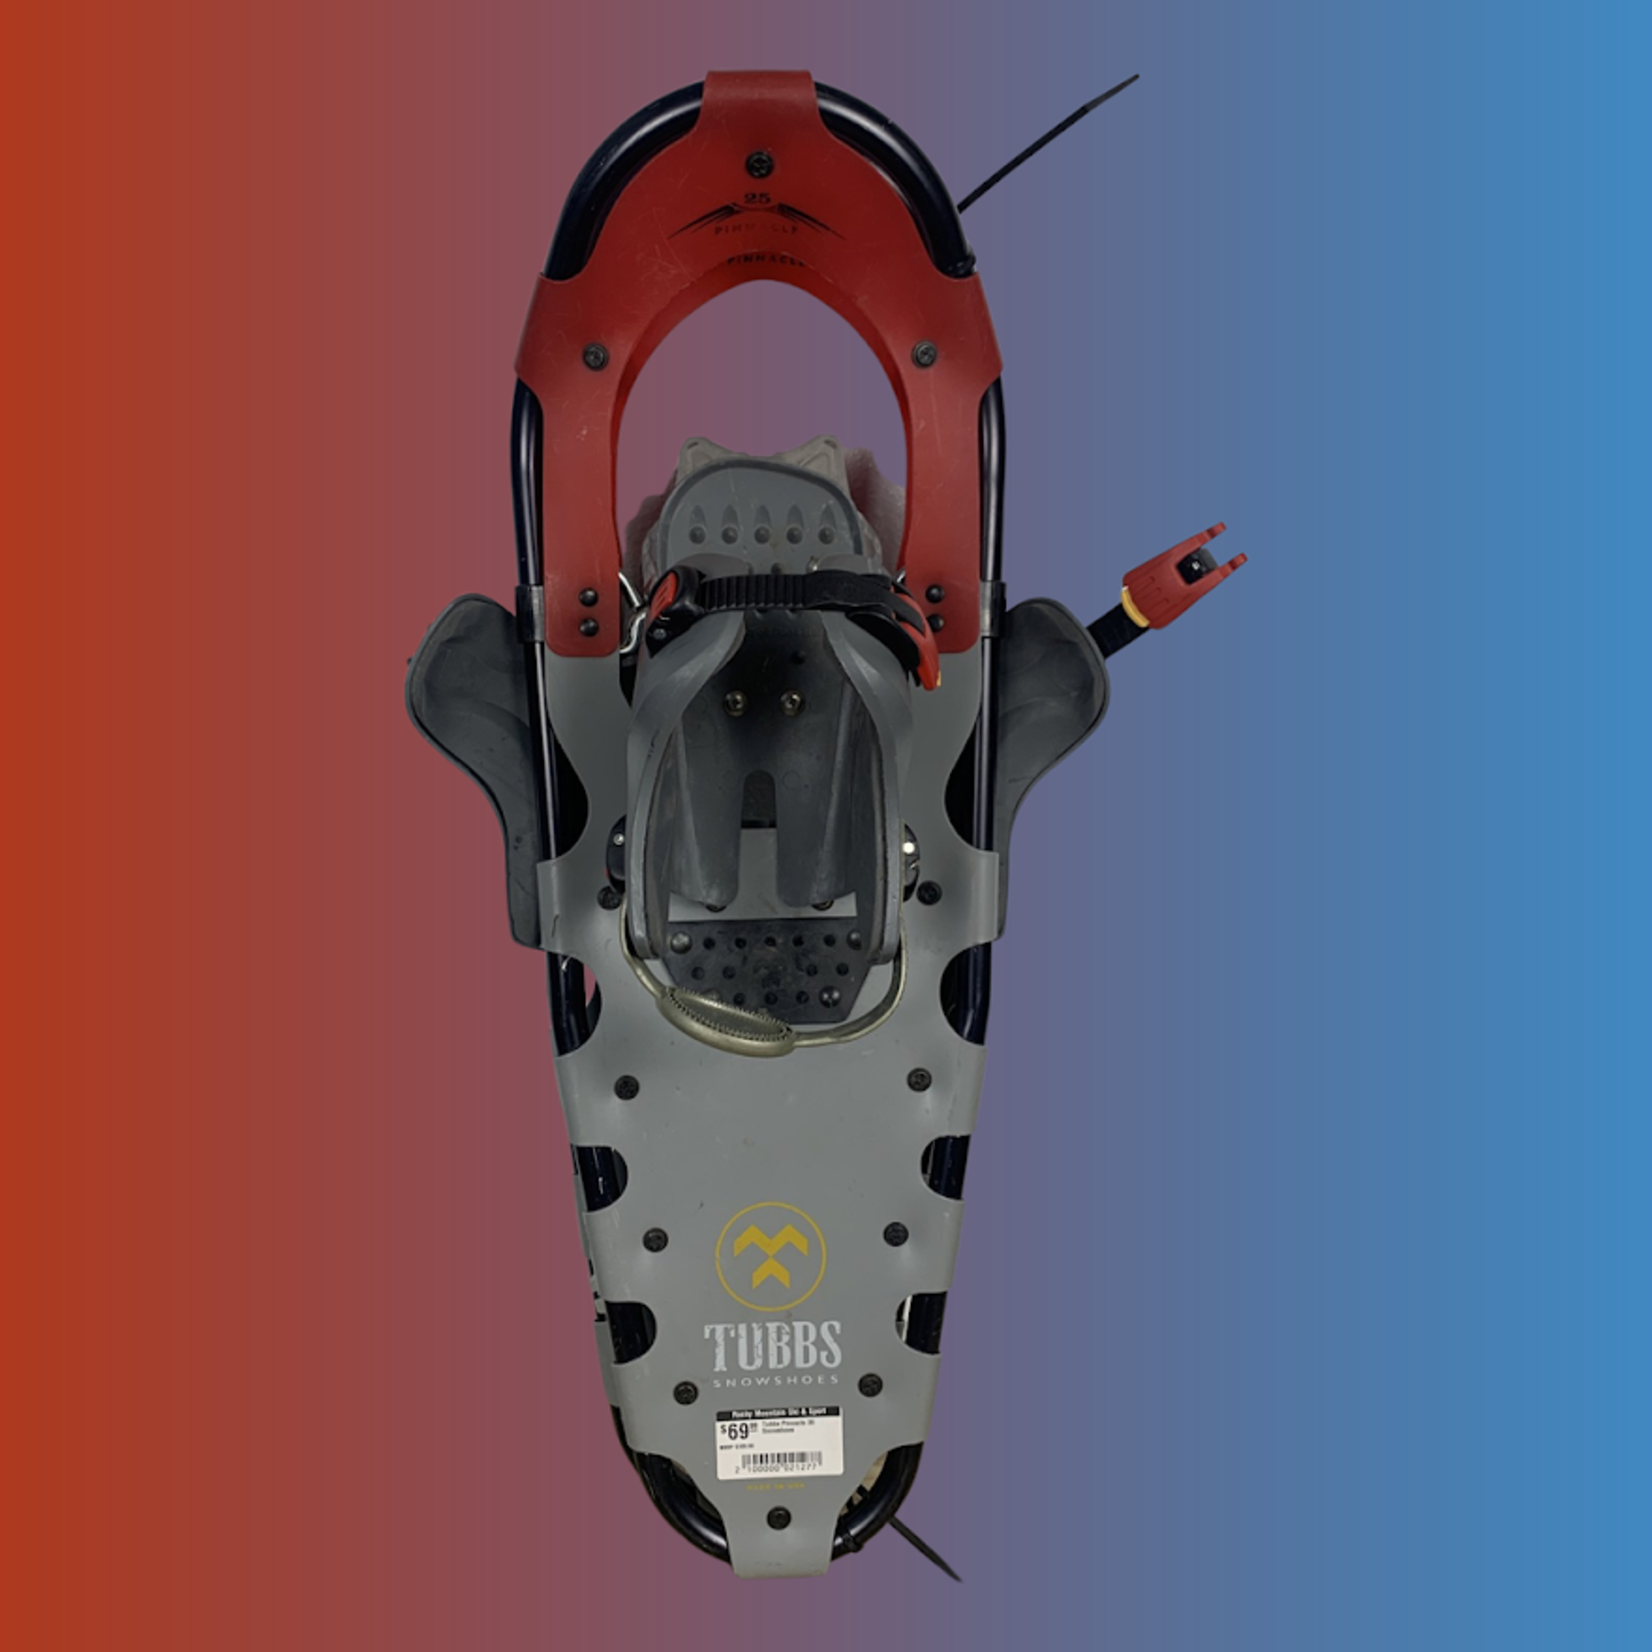 Tubbs Tubbs Pinnacle Snowshoes, Size 30 inches